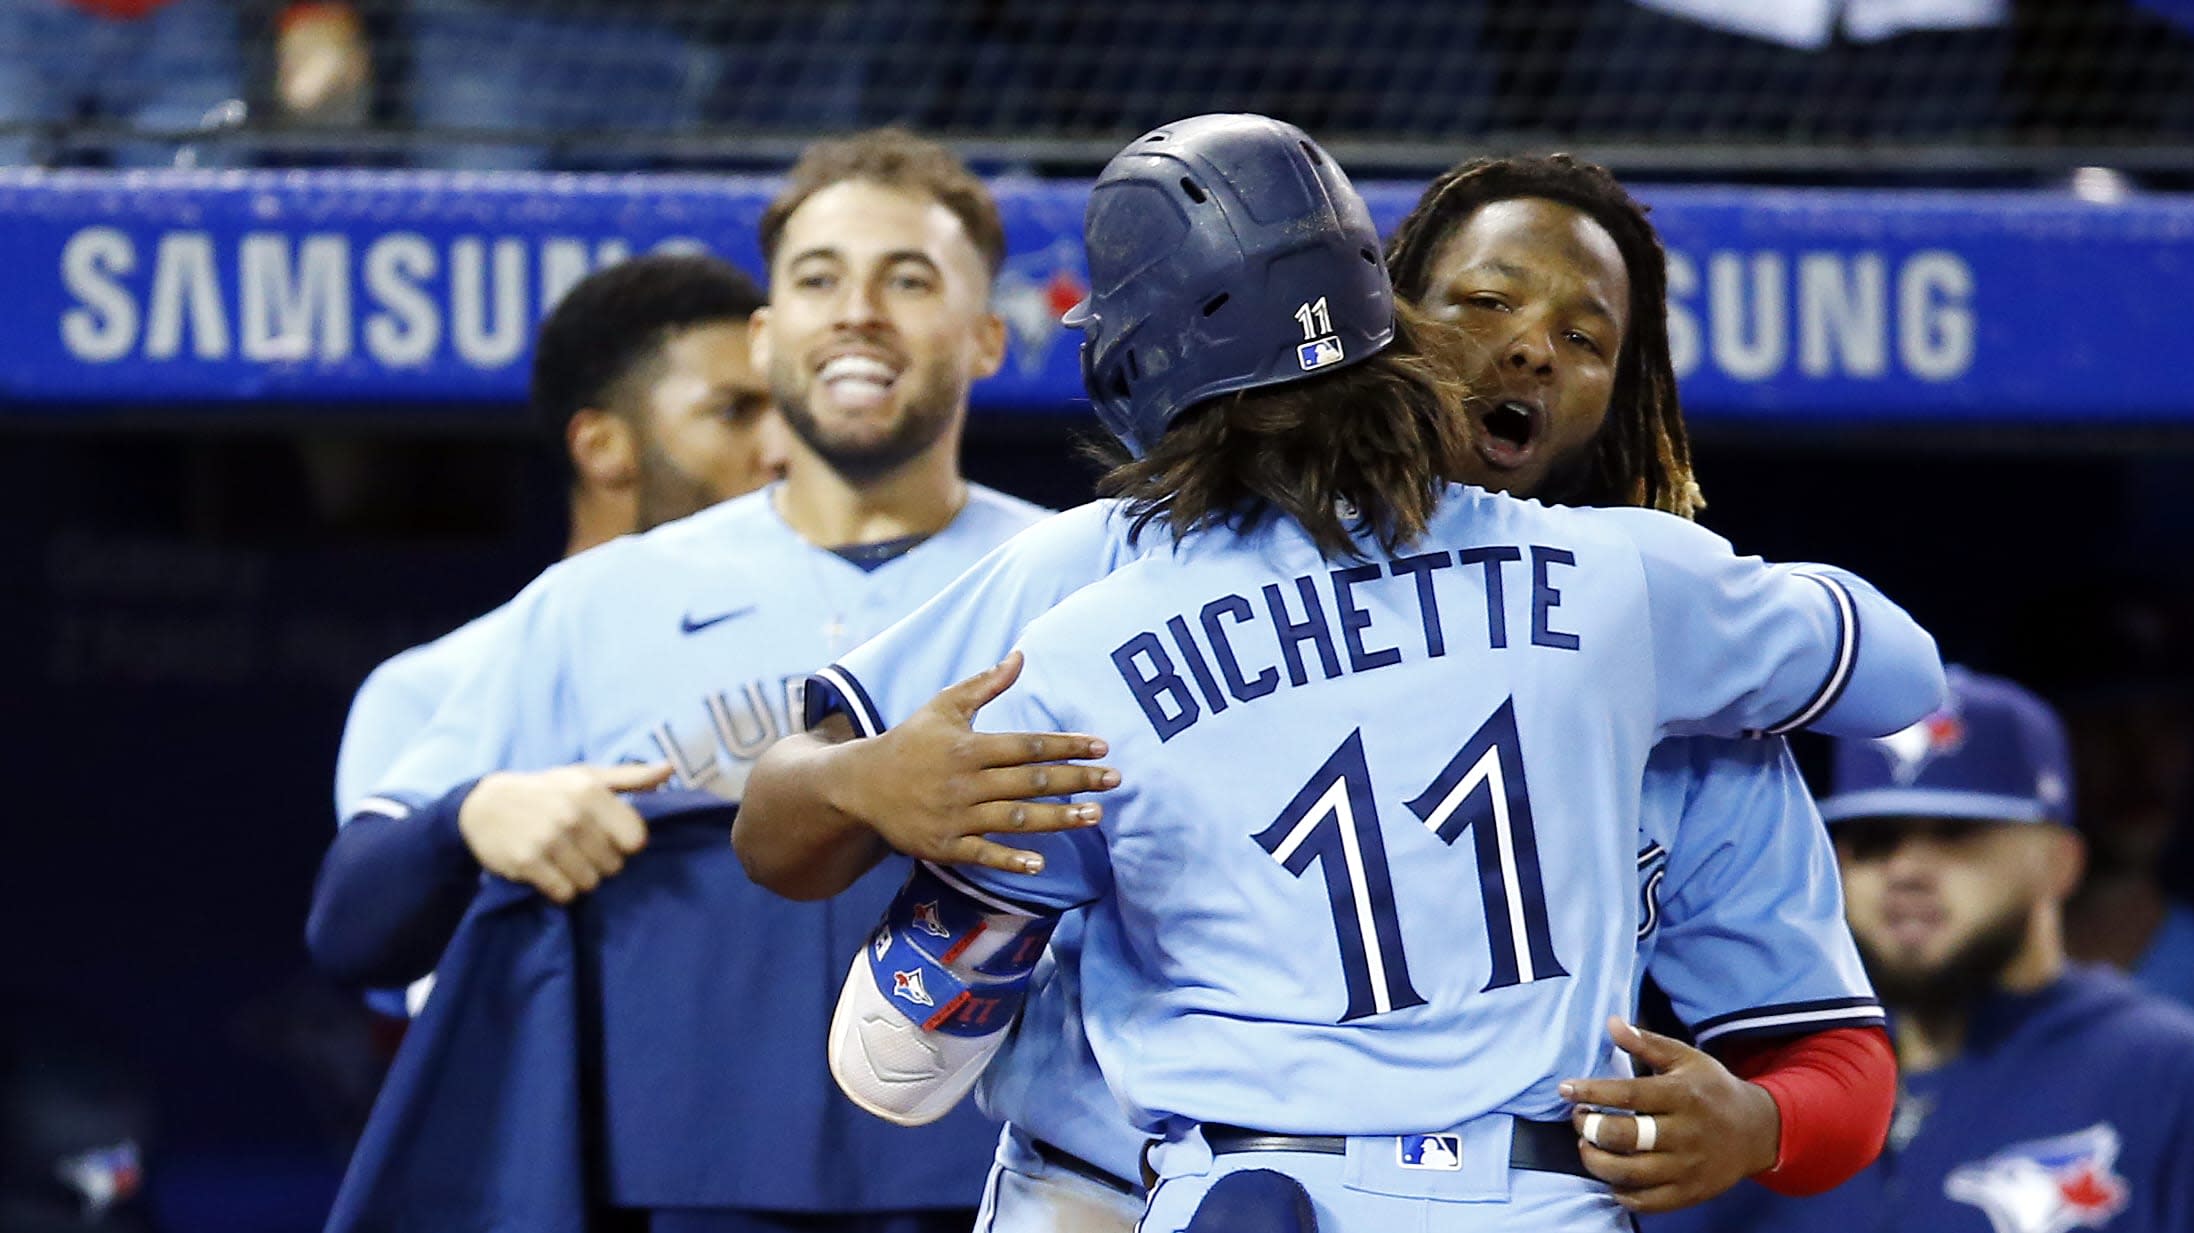 The Blue Jays deserved a better fate